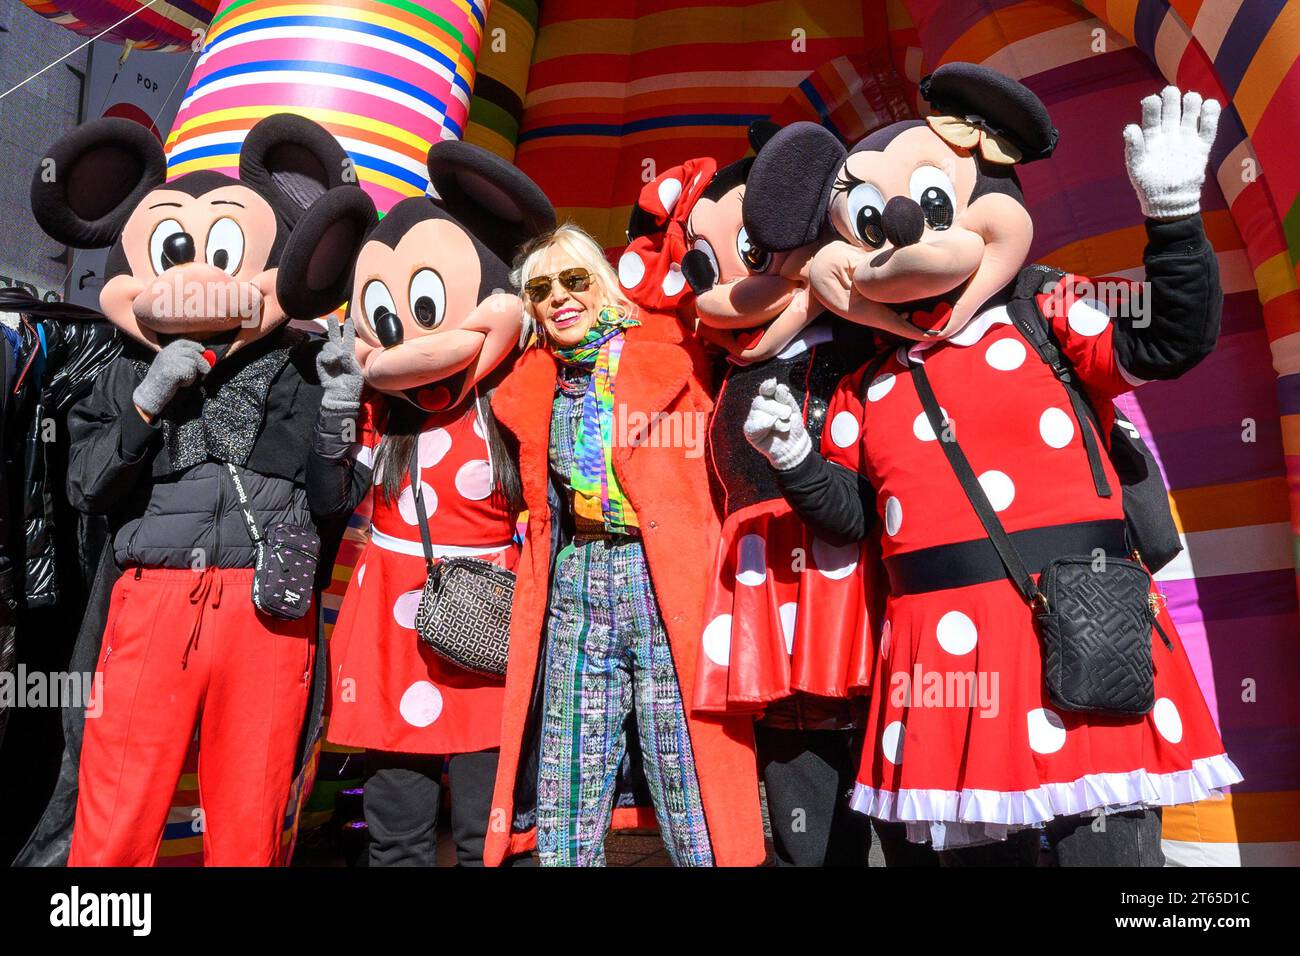 New York, USA. , . Argentinian conceptual pop artist Marta Minujín, 80, poses next to her "Sculpture of Dreams" installation in Times Square along with characters representing Mickey and Minnie Mouse. The vibrant, large-scale, 16-piece inflatable in the artist's signature stripes is Minujín's first public sculpture in New York City in her sixty-year career, and is presented to coincide with the Jewish Museum's major survey exhibition of her work, Marta Minujín: Arte! Arte! Arte!, opening on November 17. Credit: Enrique Shore/Alamy Live News Stock Photo